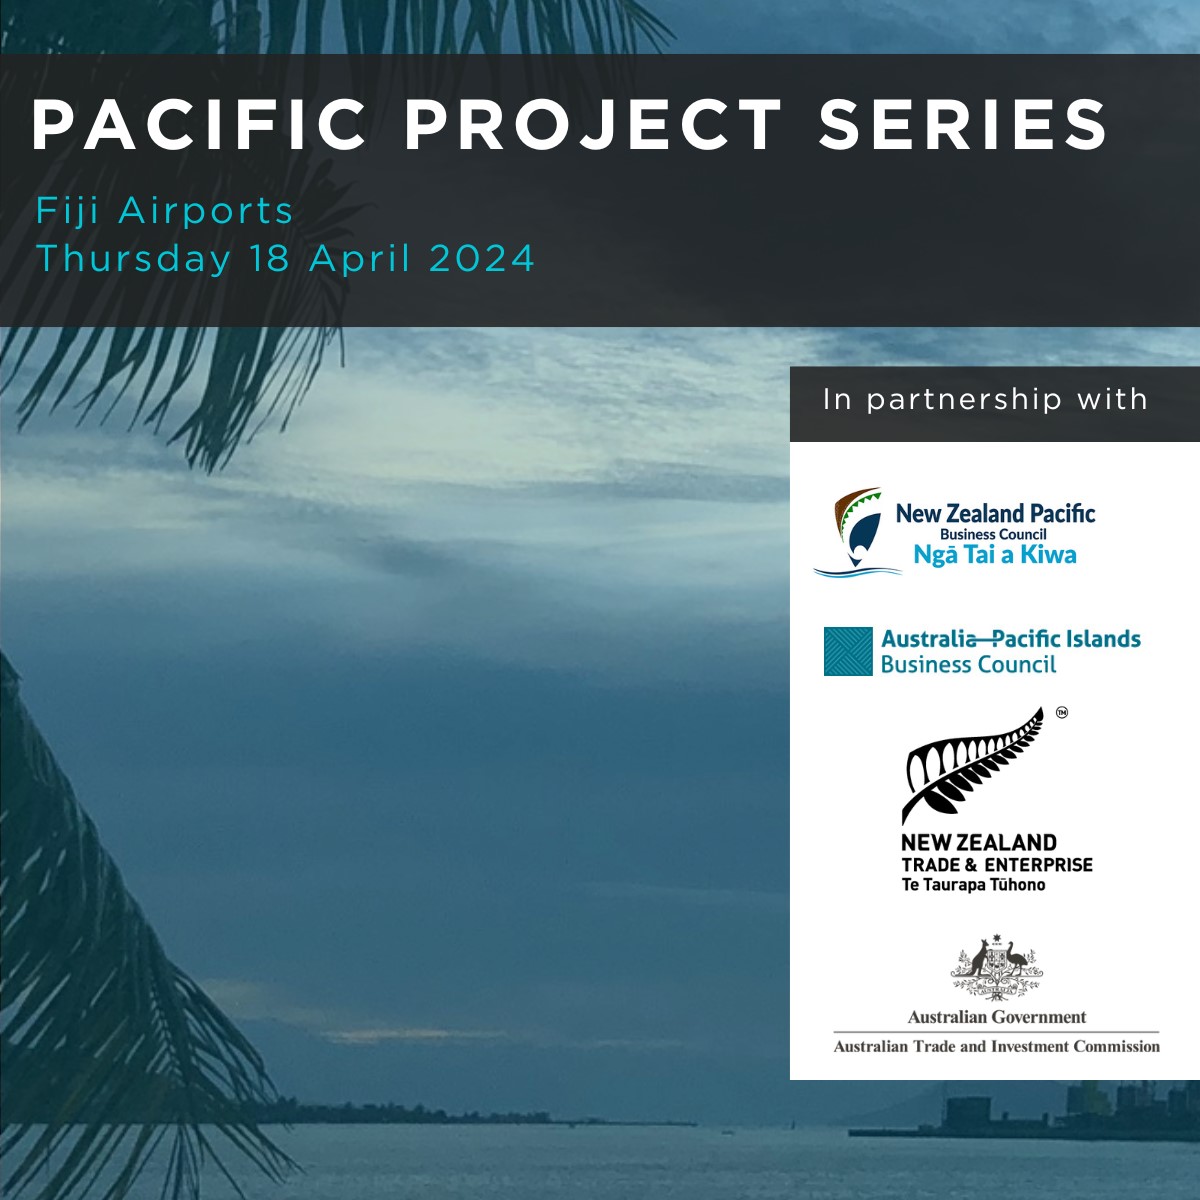 Join our joint virtual briefing with Fiji Airports (FAL) on its upcoming capital works programme for this year, 18 April, 11AM NZT. Hear about FAL’s CAPEX project pipeline for 2024/25, the tender process & supplier expectations. Register here: rebrand.ly/r4lkxt3 @NadiAirport